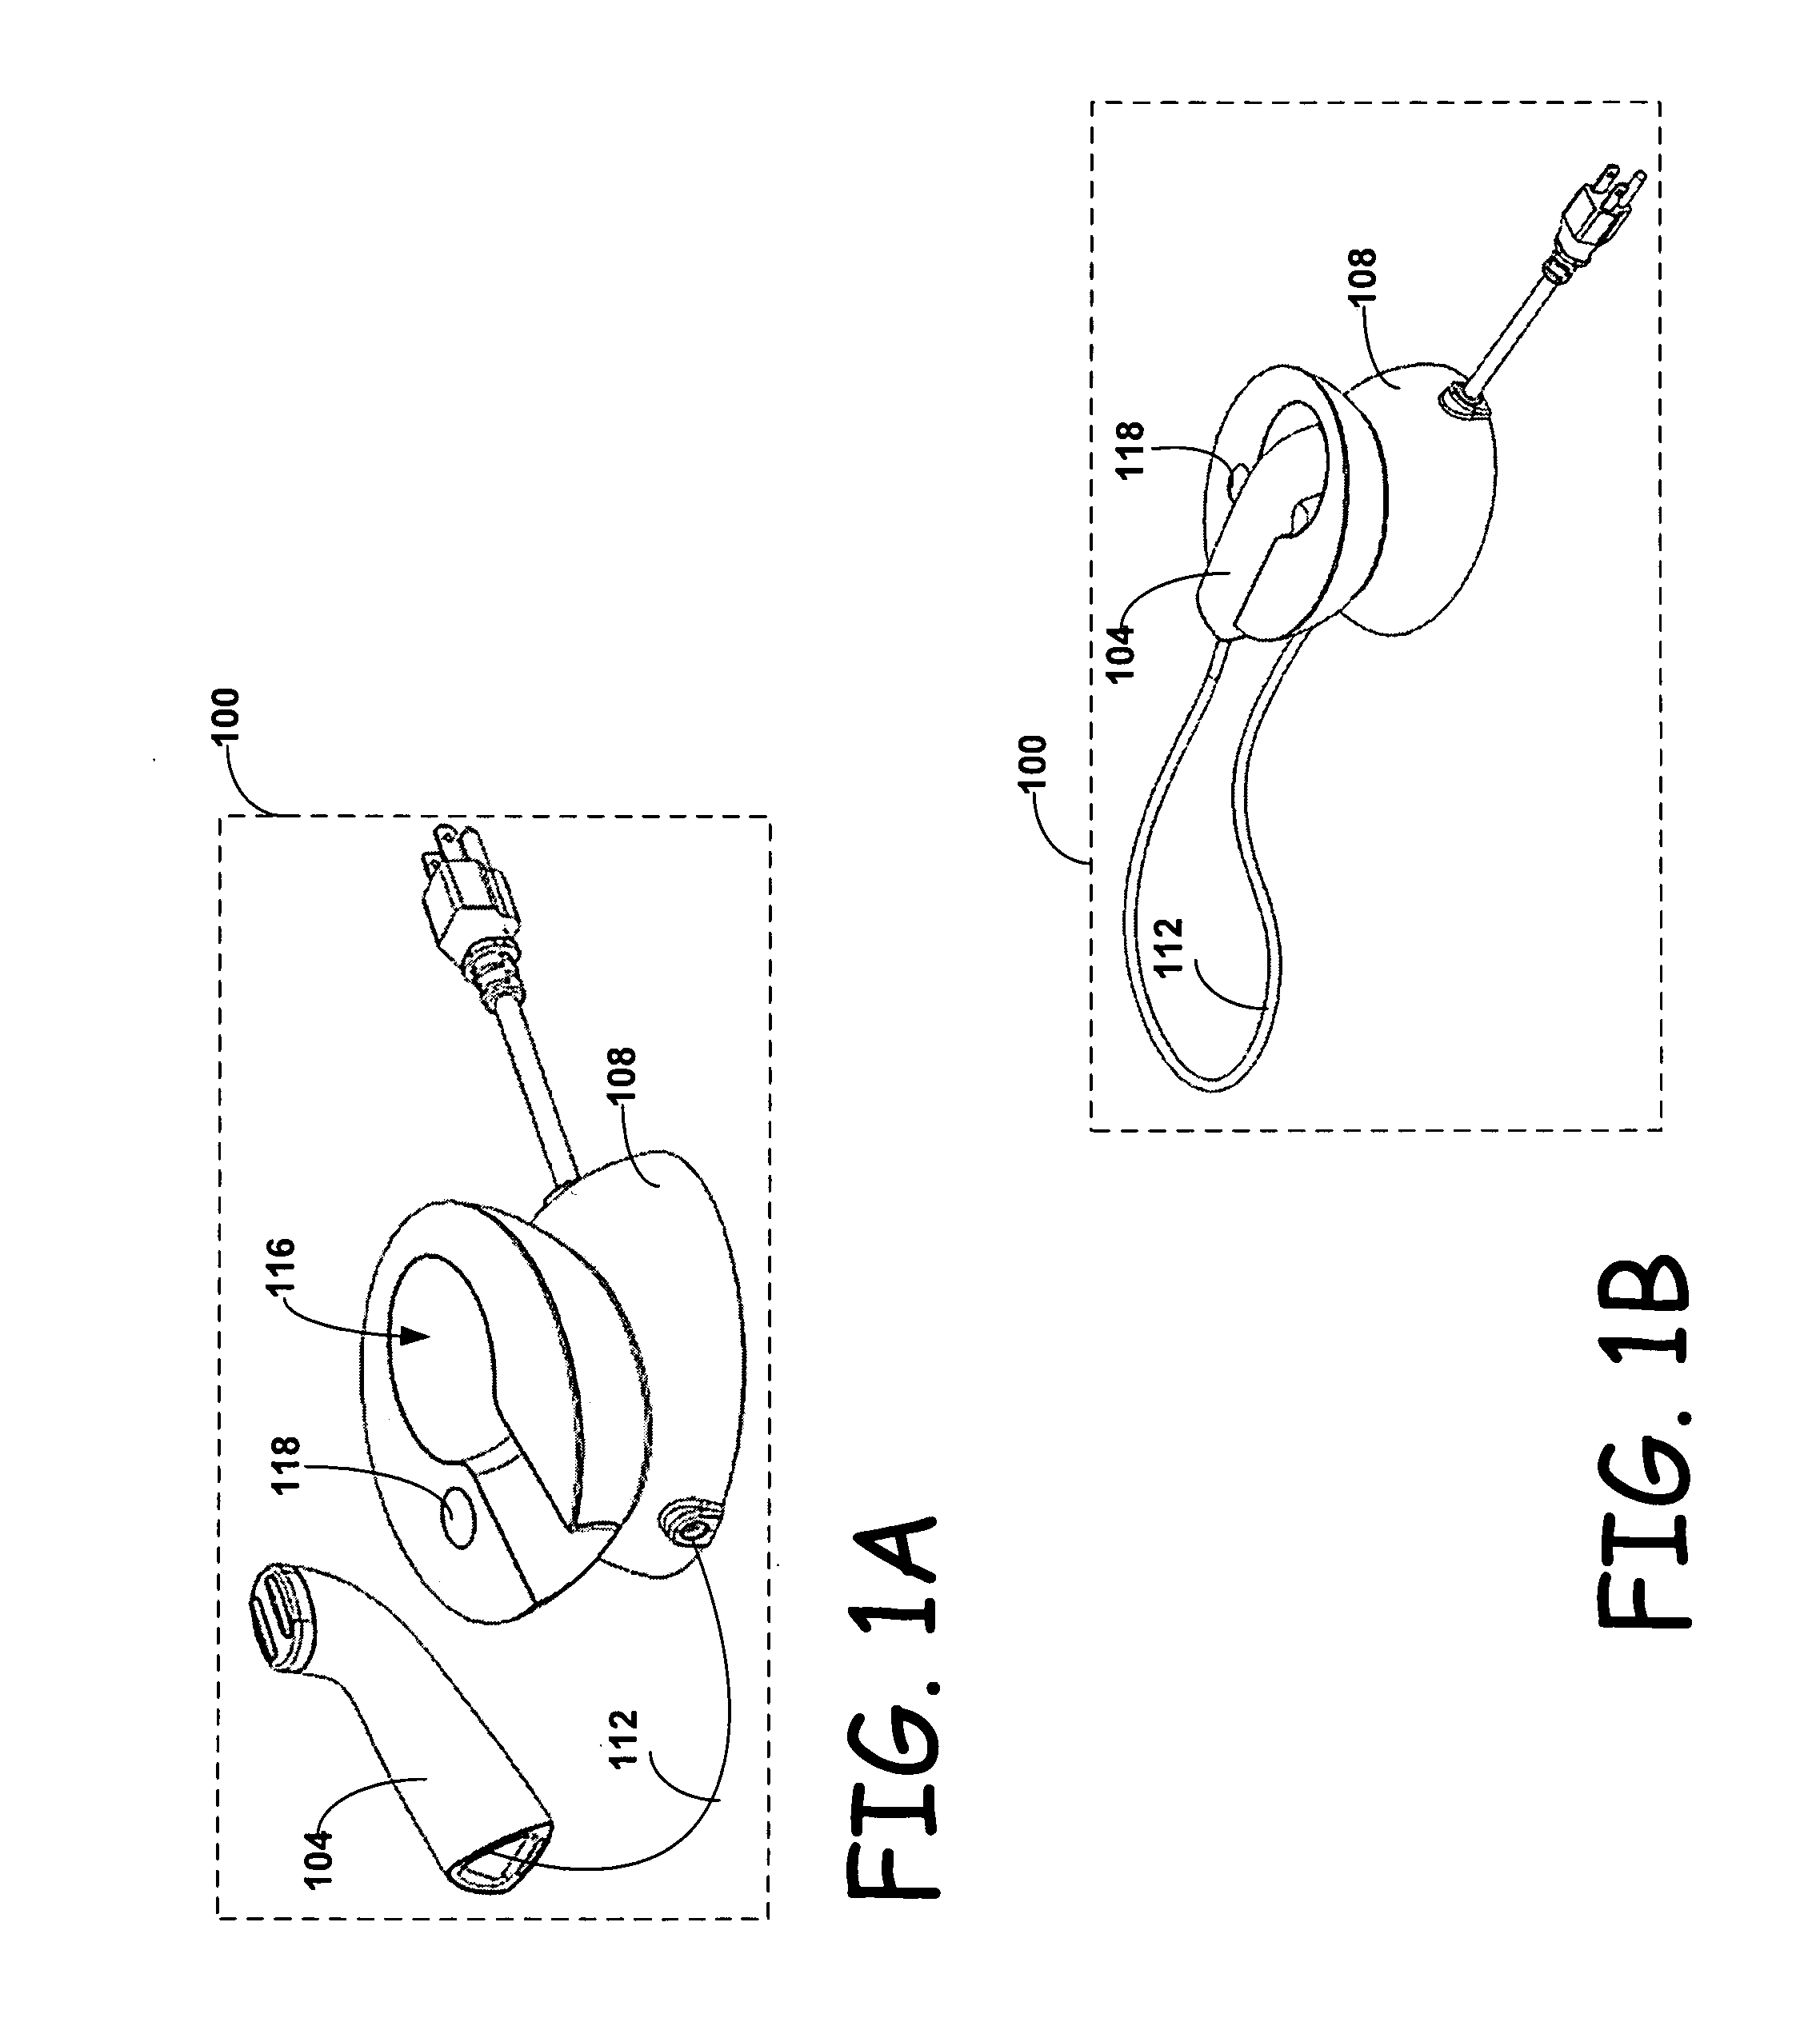 Skin treatment apparatus for personal use and method for using same